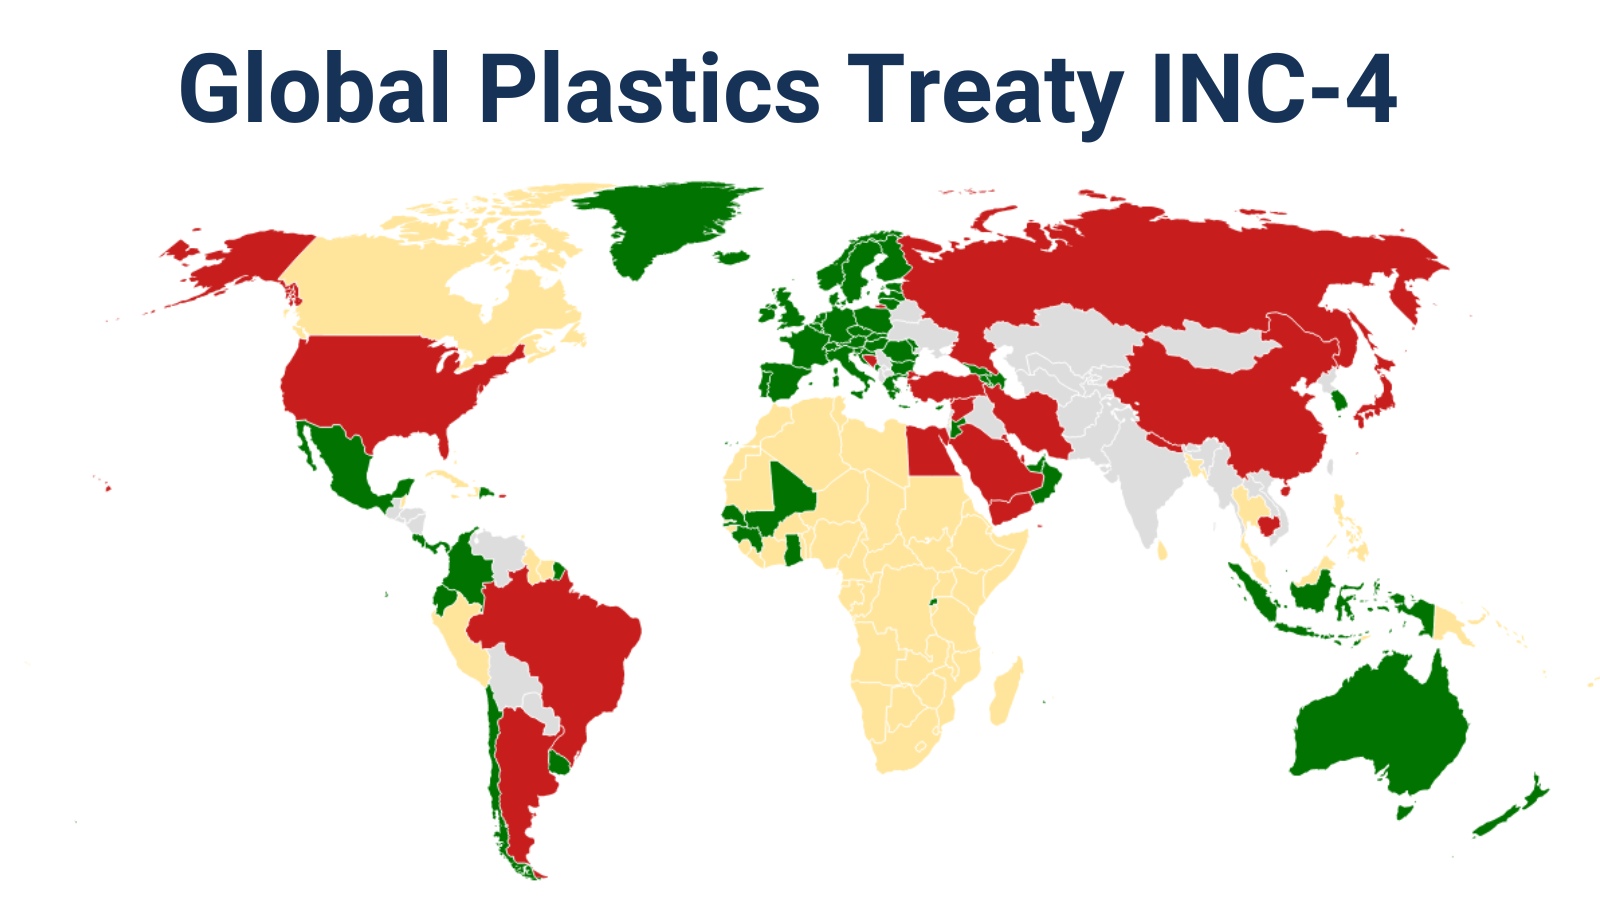 175 nations have agreed to develop a legally binding agreement on plastic pollution by 2024, prompting a major step towards reducing plastic use, the subsequent greenhouse gas emissions from plastic production, use and disposal and improving plastic waste management. learn more about how the treaty could help tackle pellet pollution.